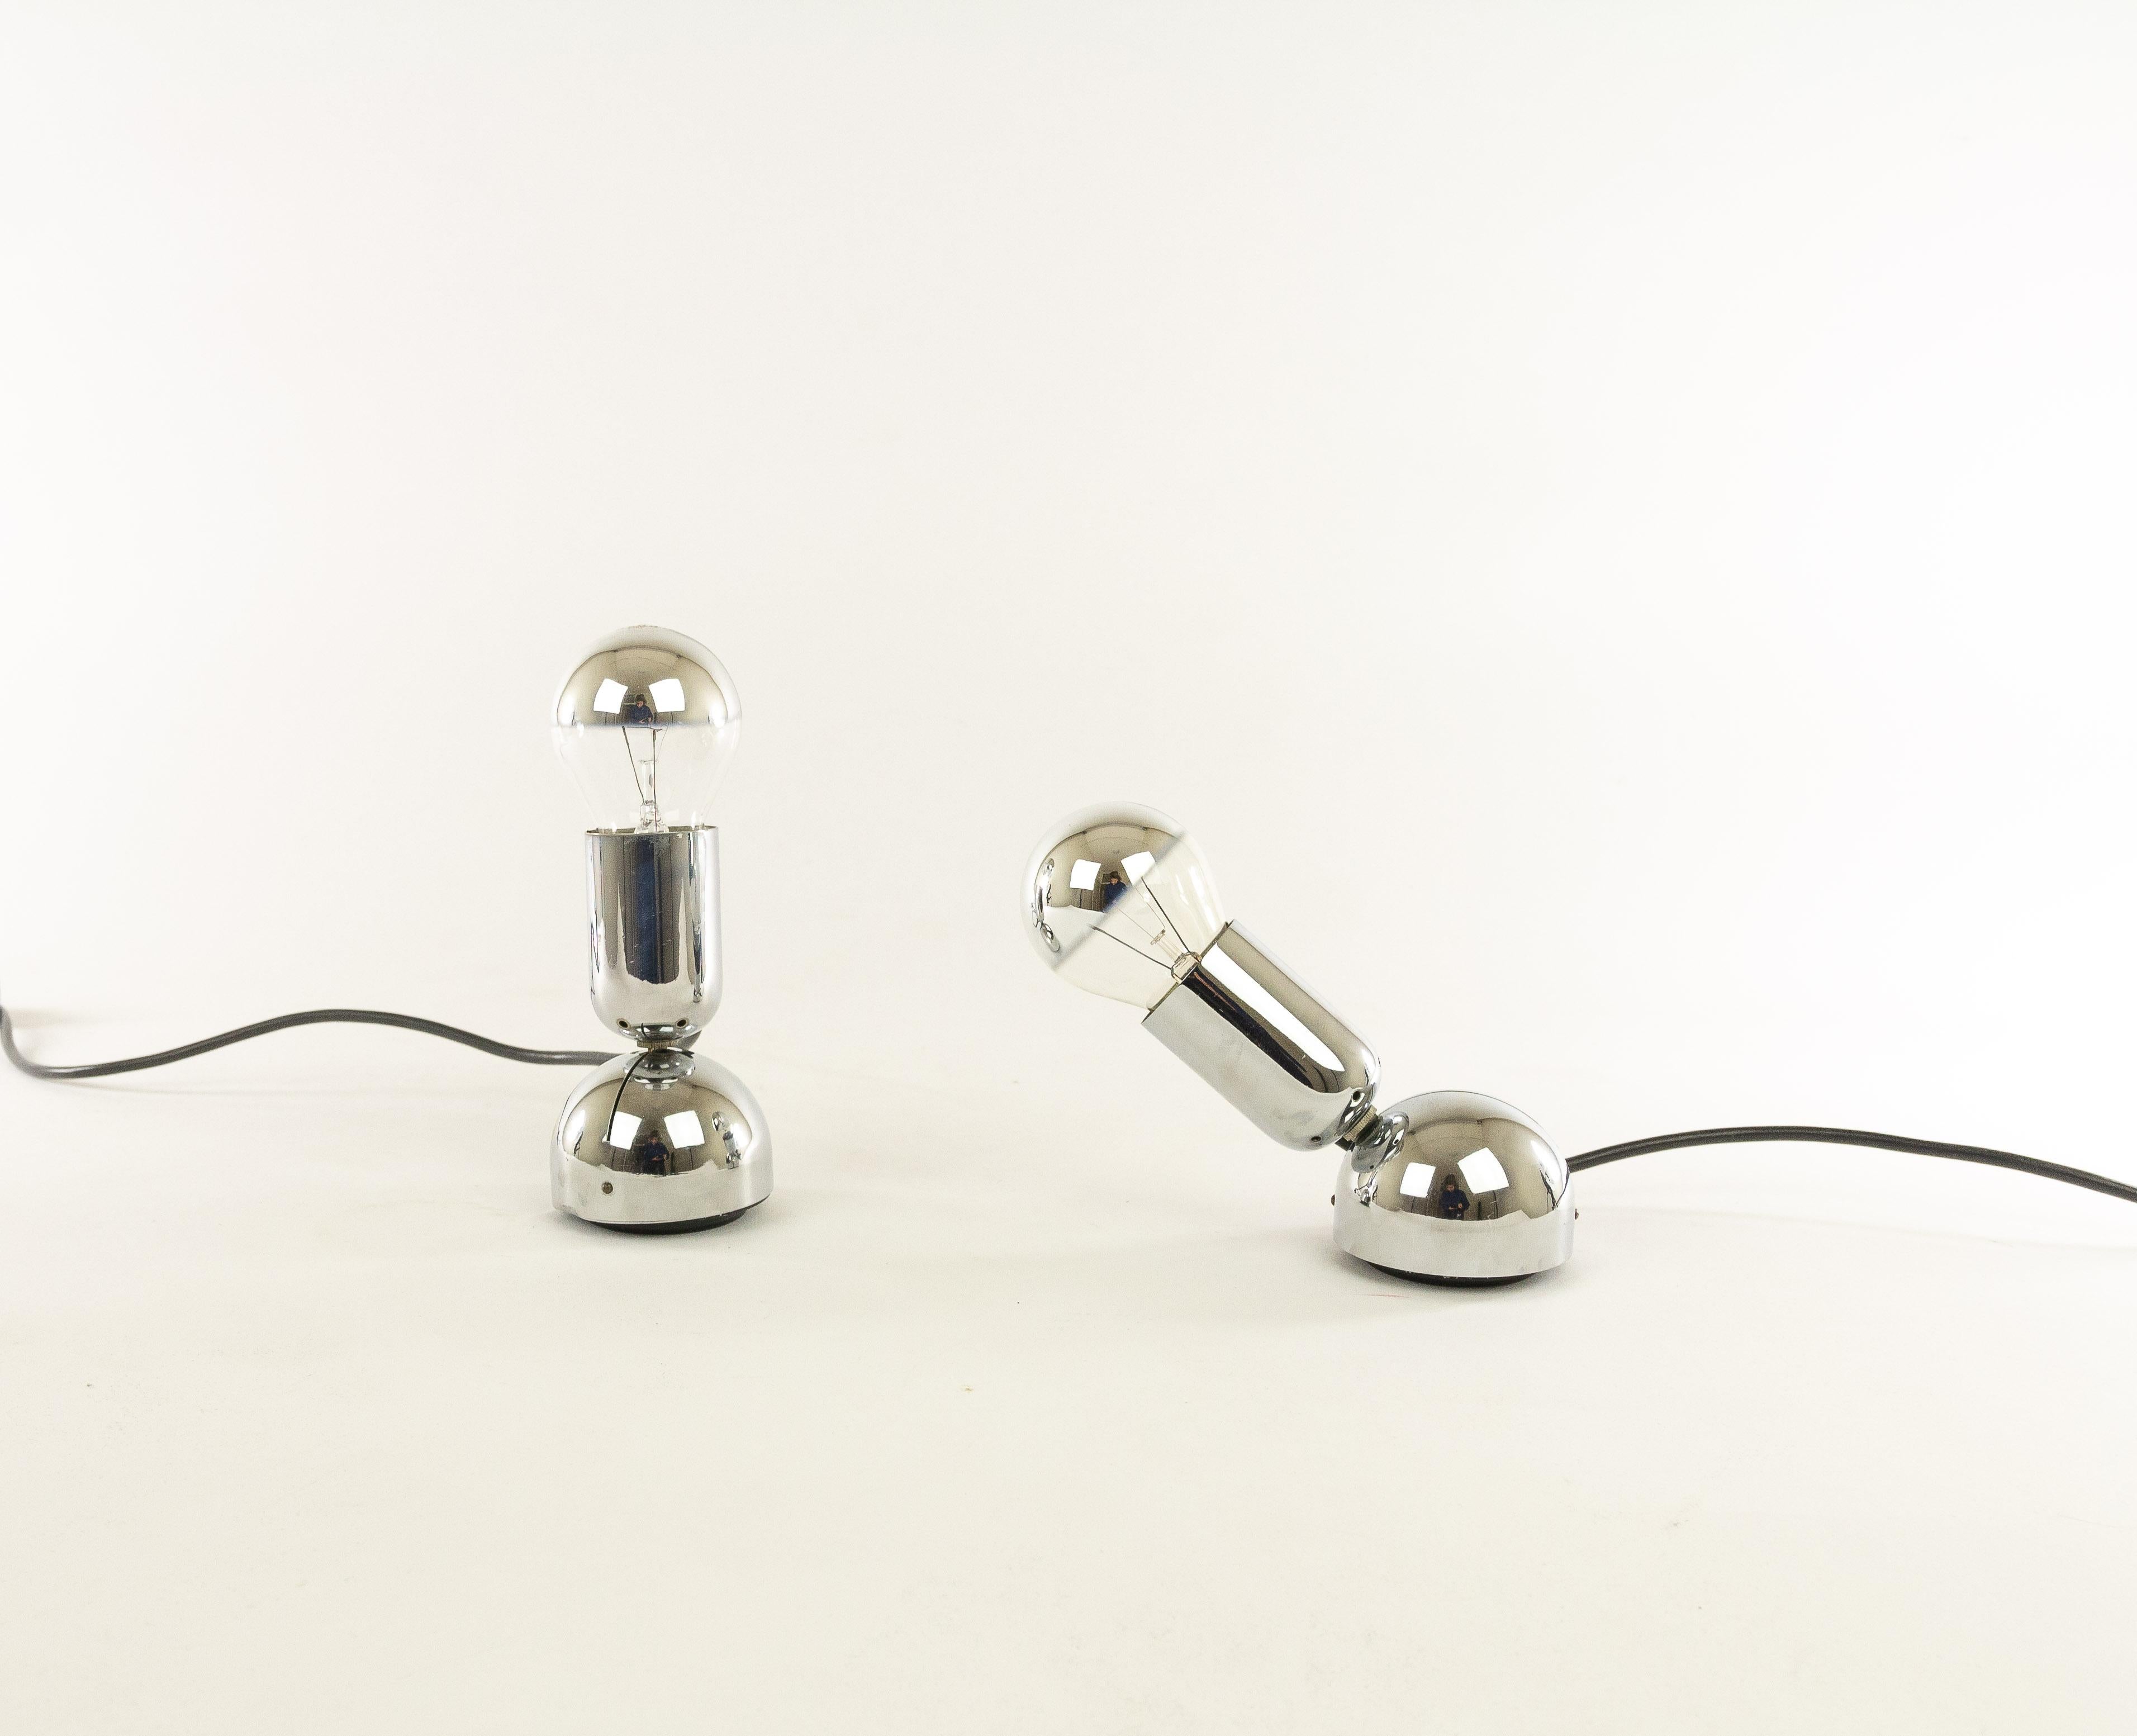 Polychromed Pair of Chrome Pollux Table Lamps Model by Ingo Maurer for Design M, 1967